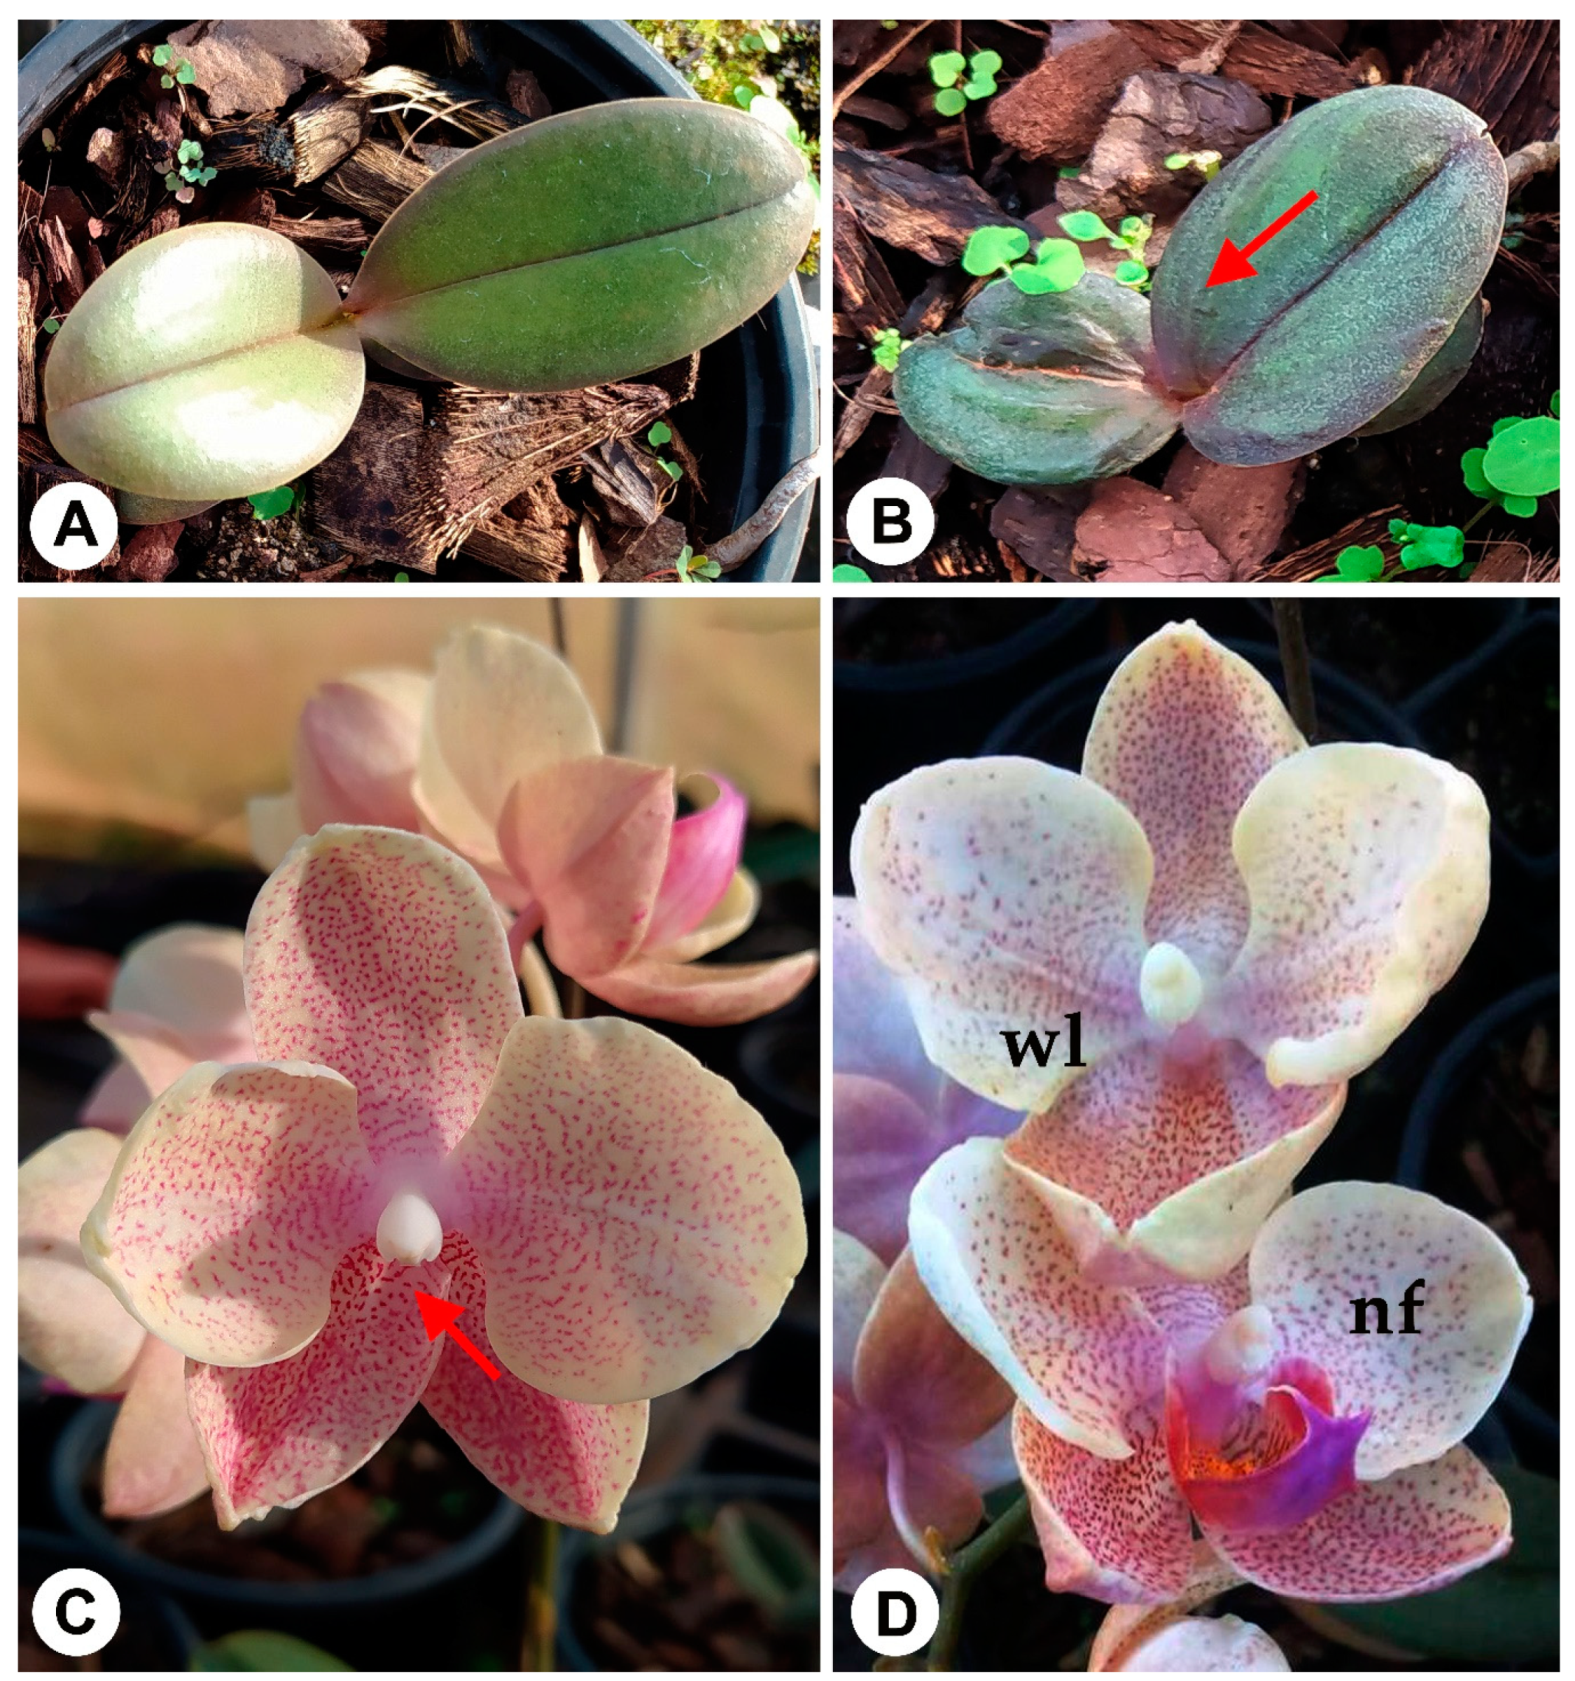 Ijms Free Full Text An Overview Of Orchid Protocorm Like Bodies Mass Propagation Biotechnology Molecular Aspects And Breeding Html